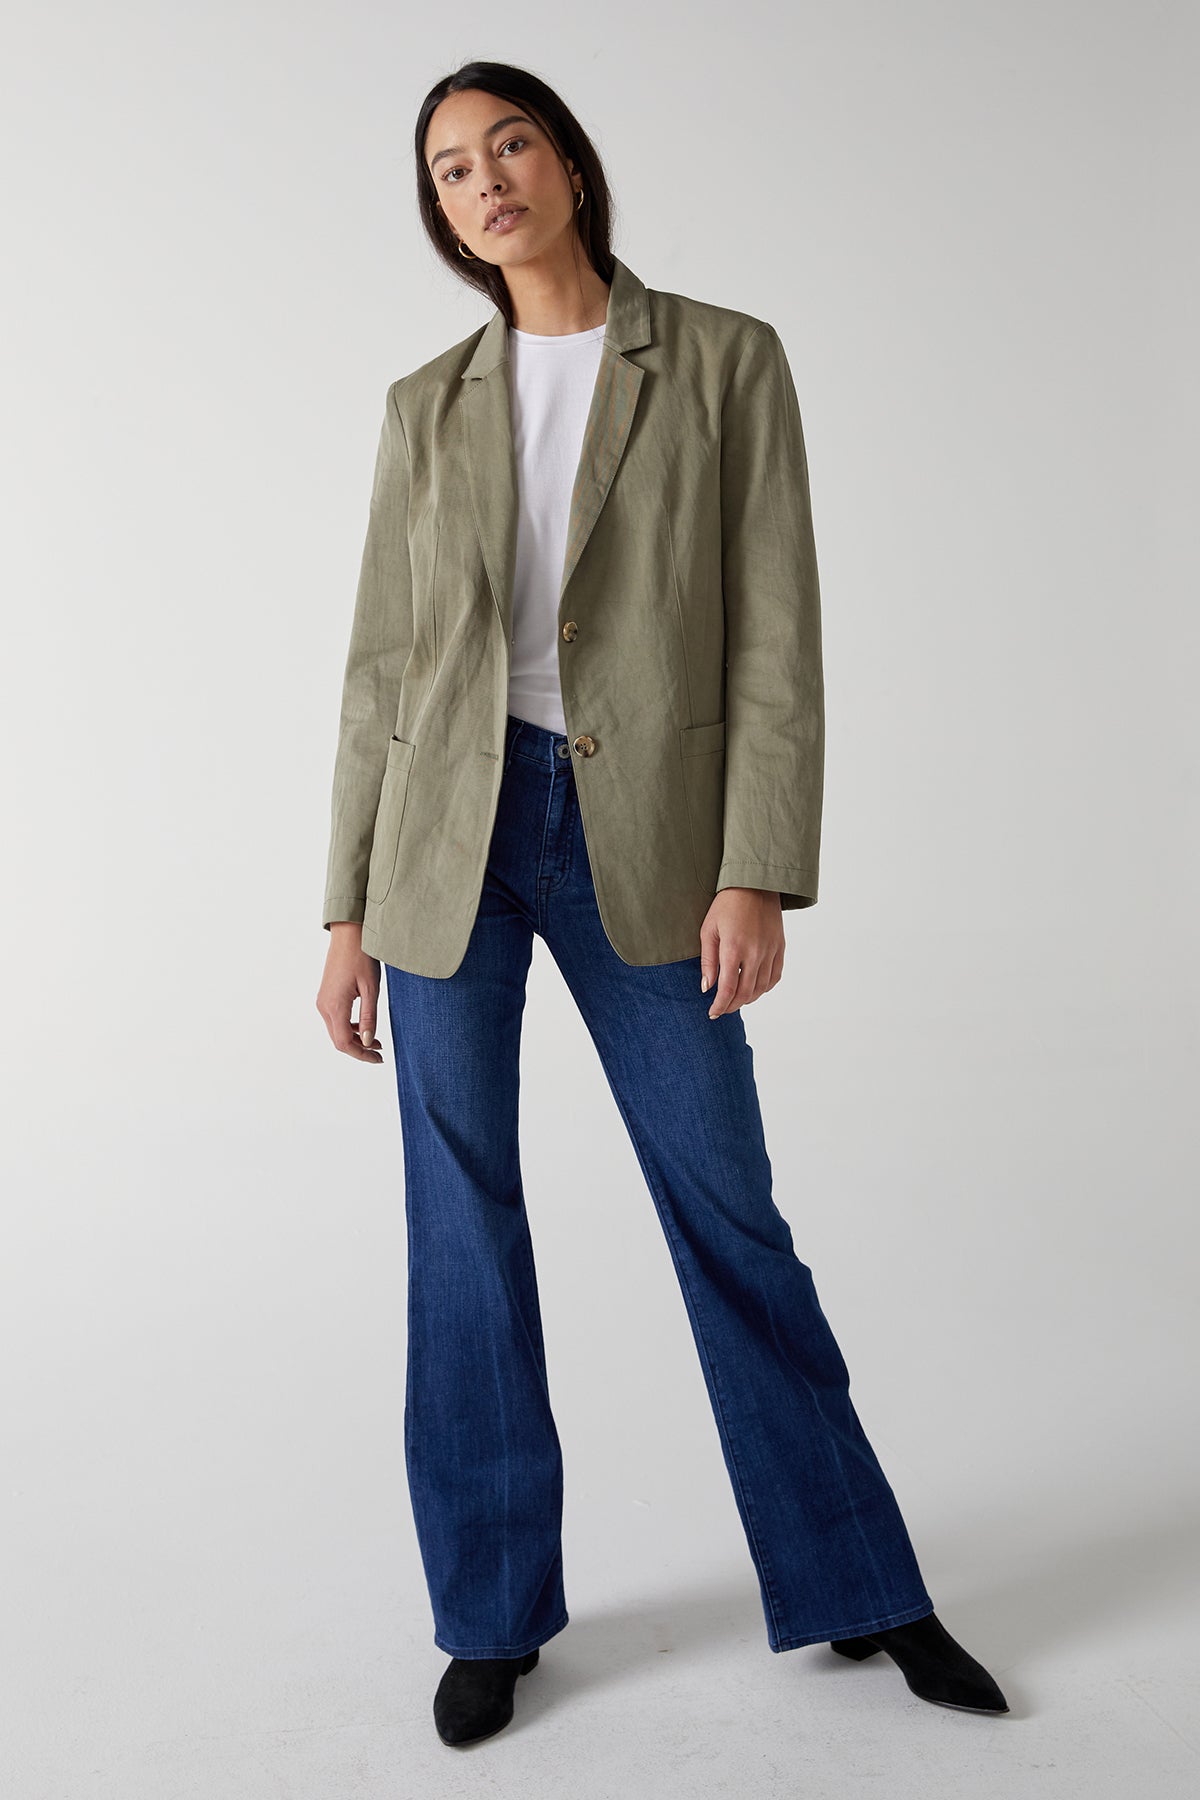   The model is wearing a ECHO BLAZER by Velvet by Jenny Graham and flared jeans. 